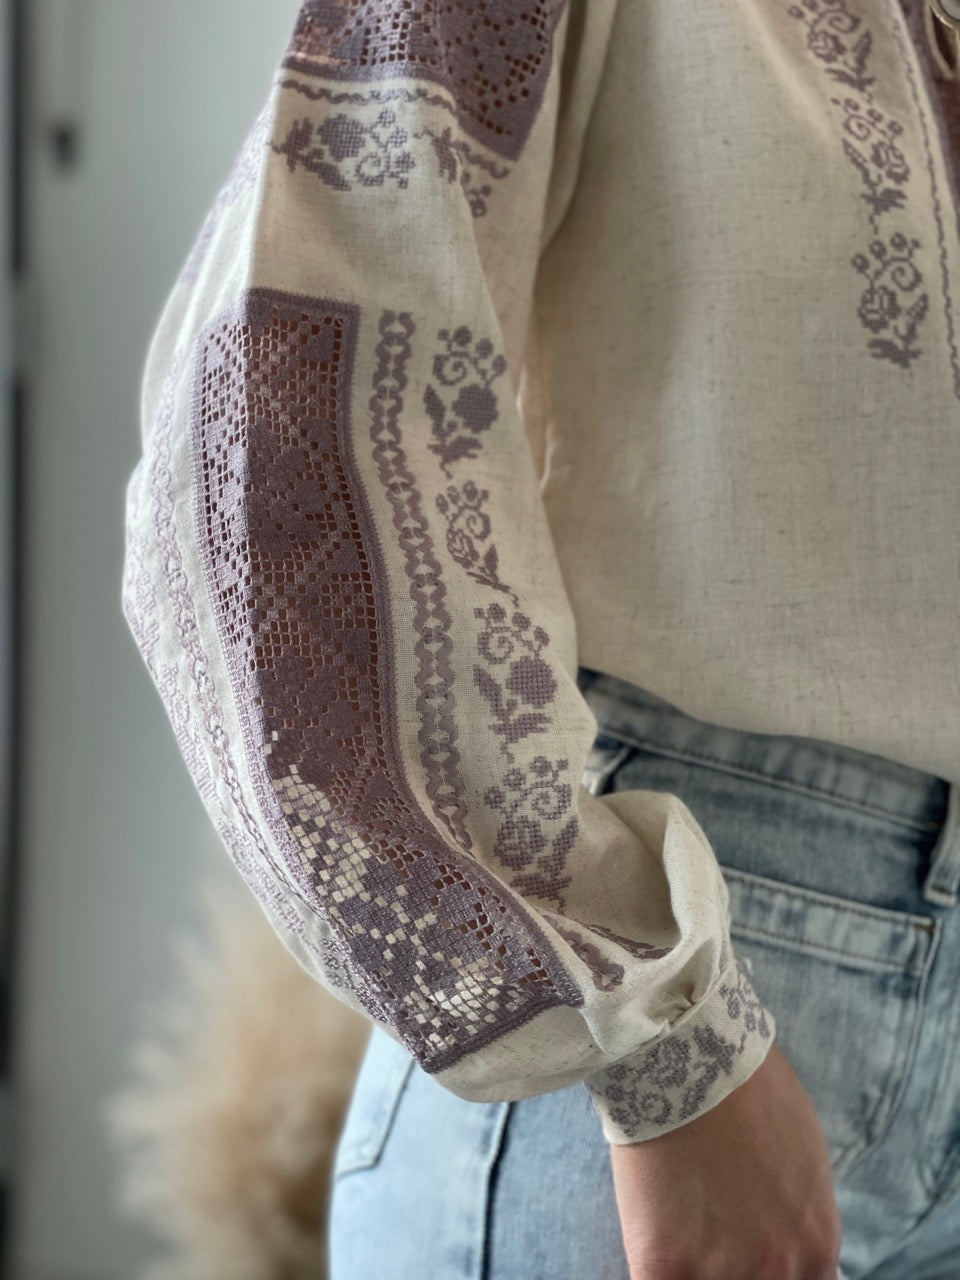 The White Women's Blouse with Purple-Grey Embroidery and Lace